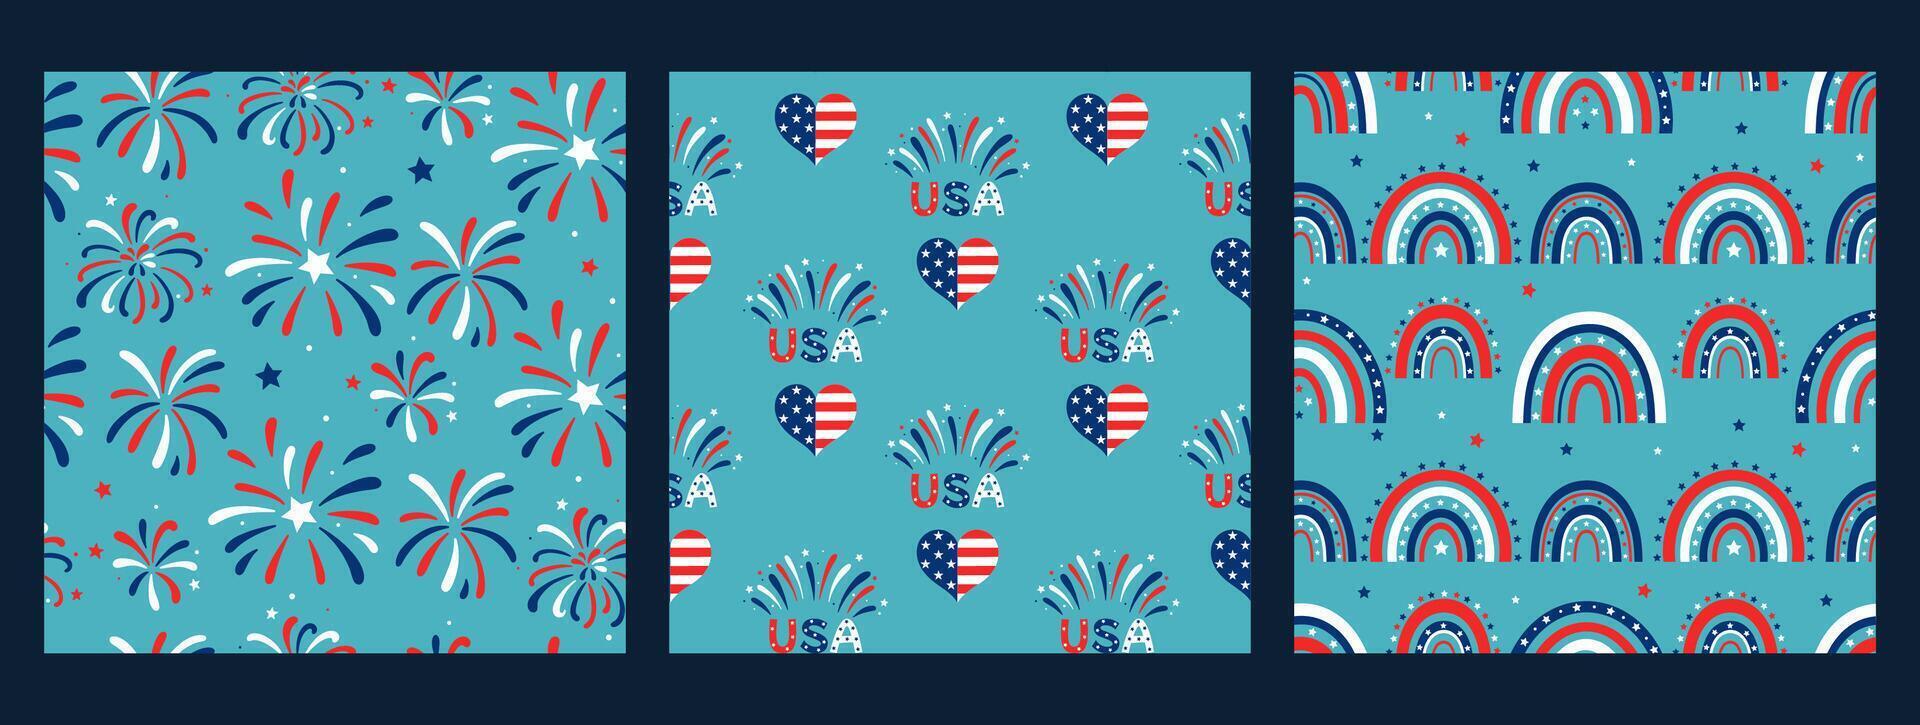 Set of seamless patterns for the 4th of July celebration. graphics. vector